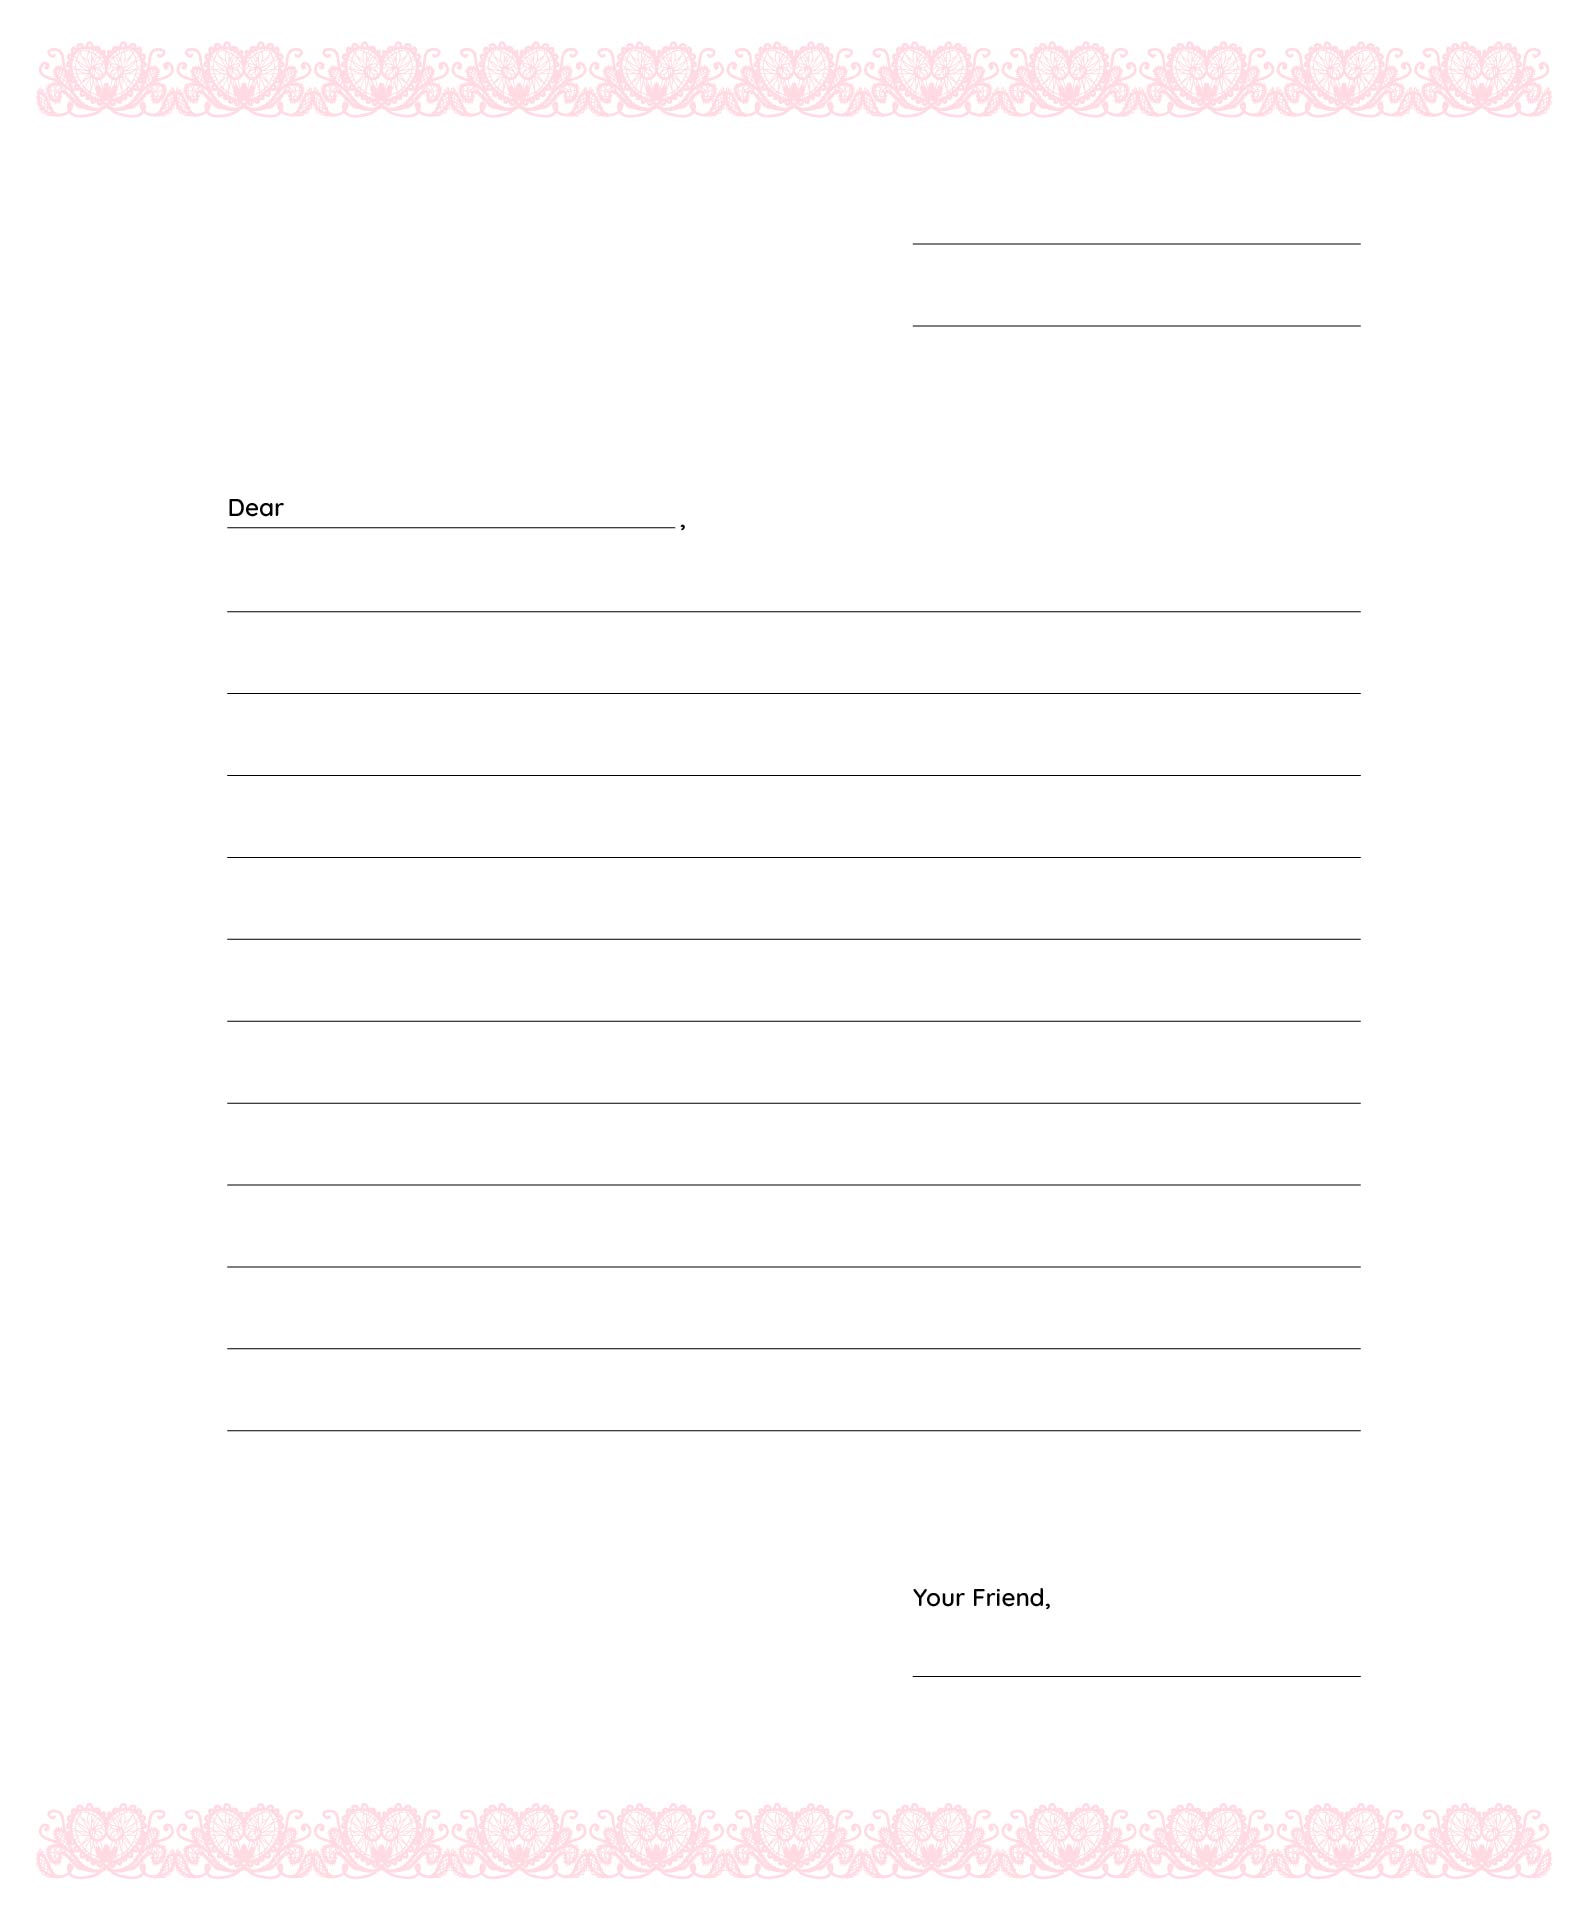 friendly-letter-template-for-3rd-grade-theveliger-friendly-letter